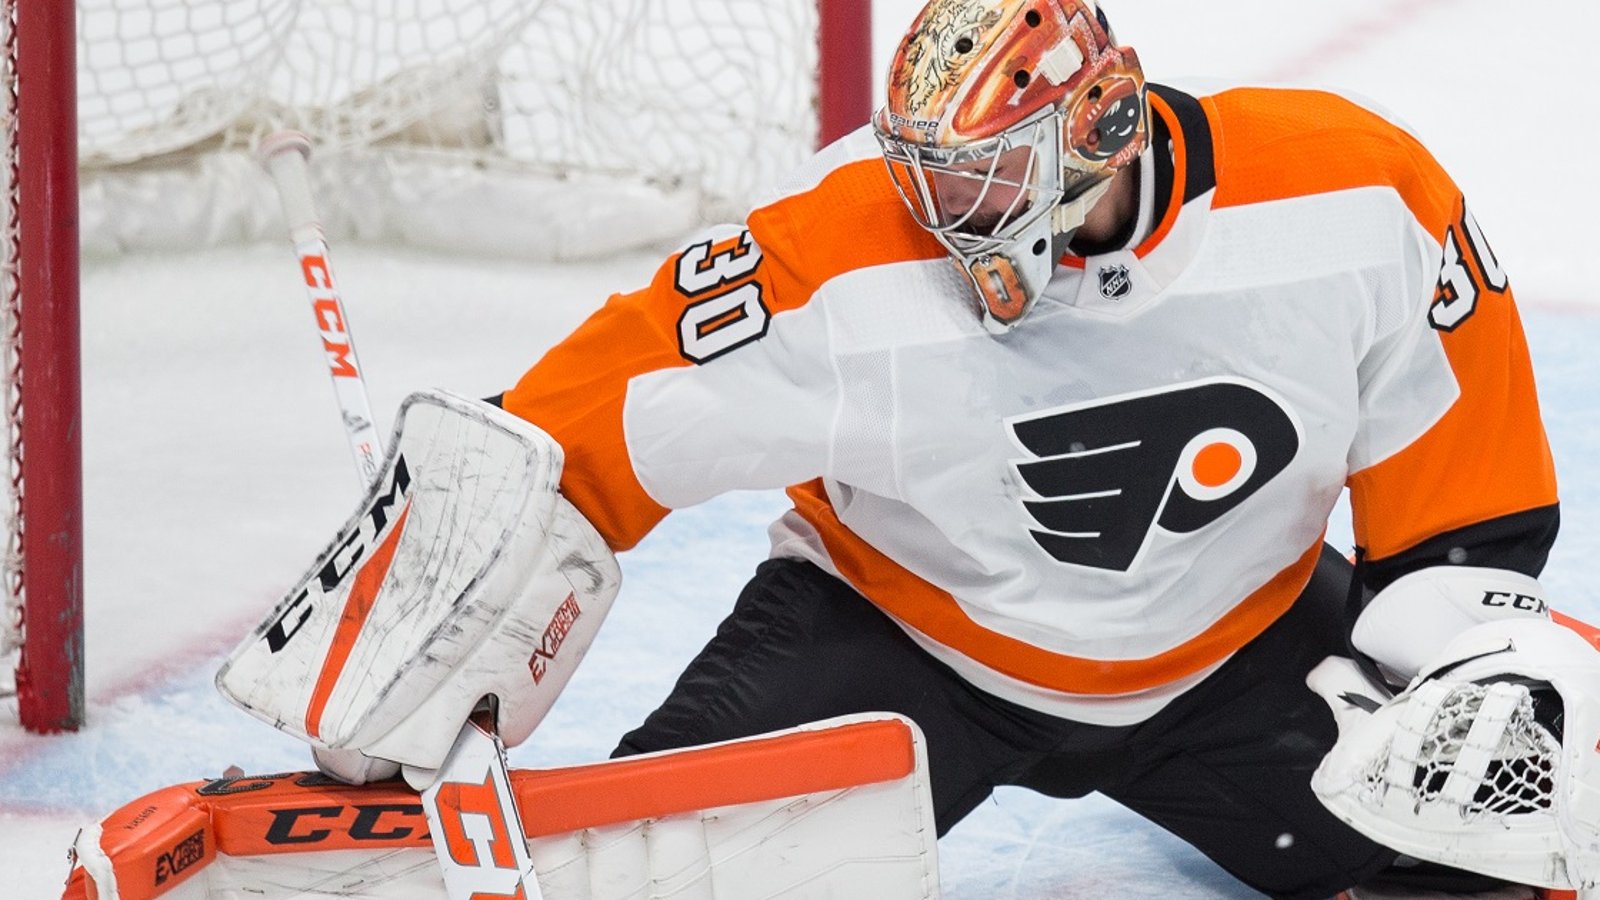 Maple Leafs sign former Flyers goaltender over the week end.